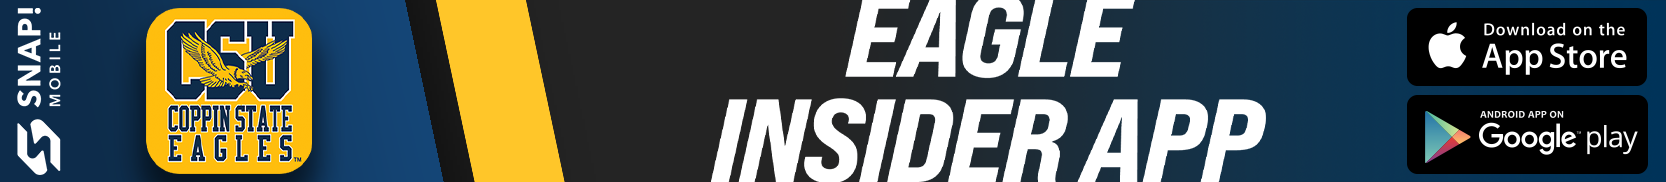 Eagle Insider App - download on App Store and Google play